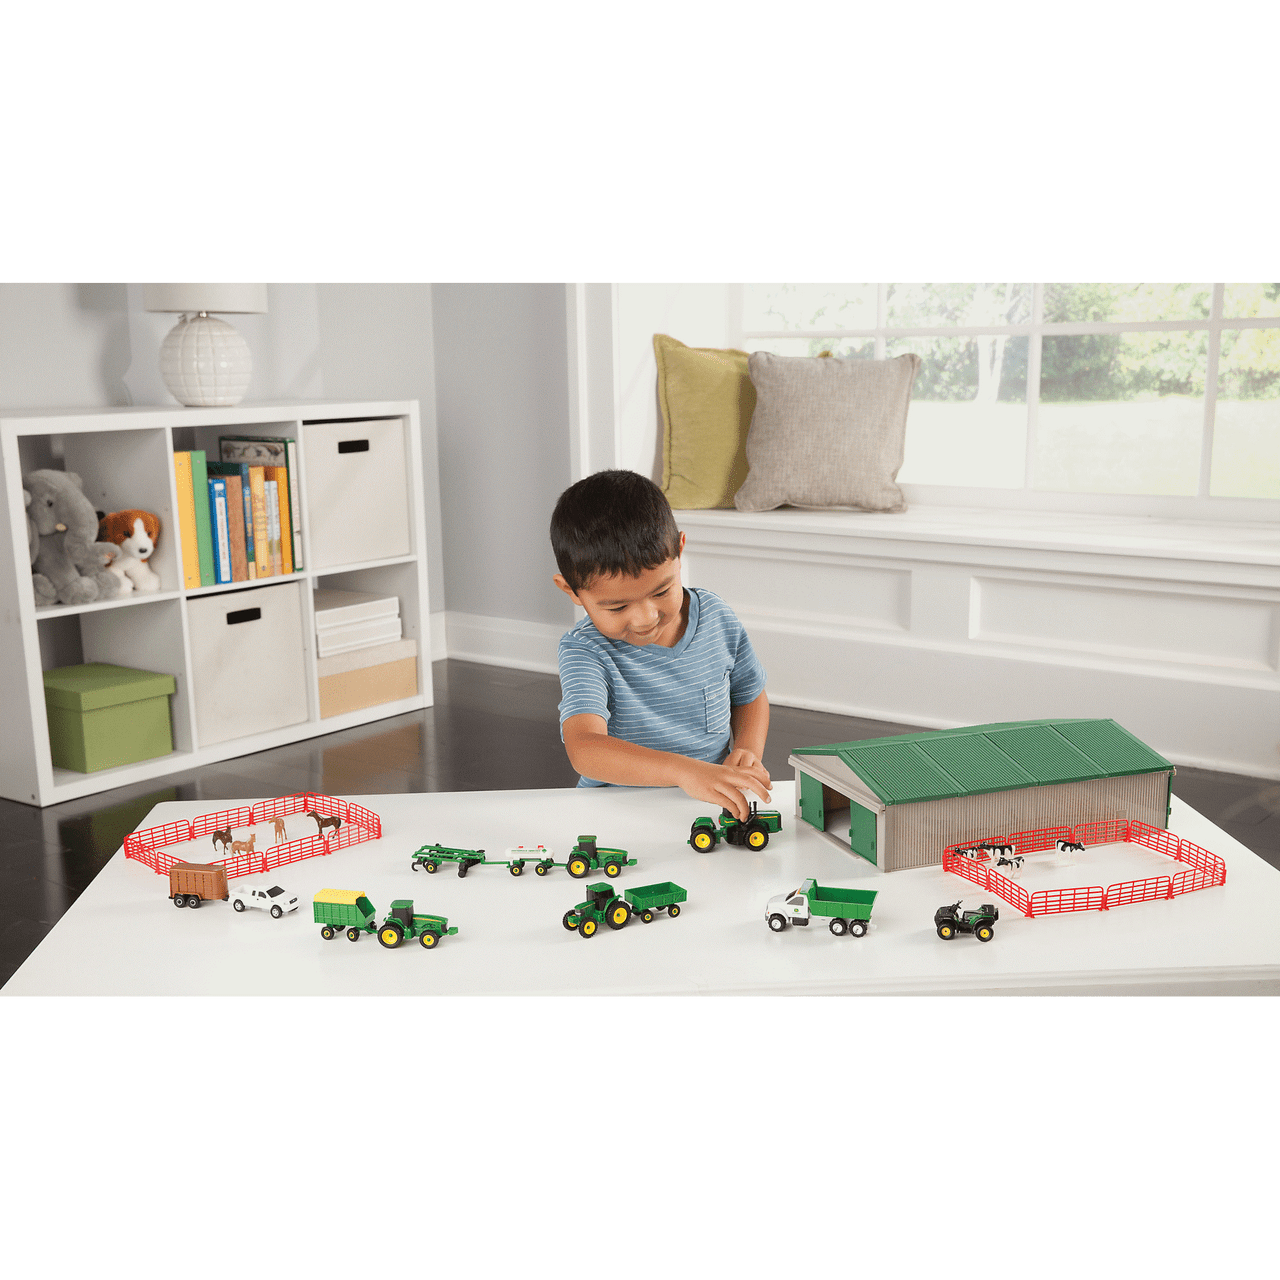 John Deere 70 Piece Farm Value Set with vehicles, implements, animals and shed